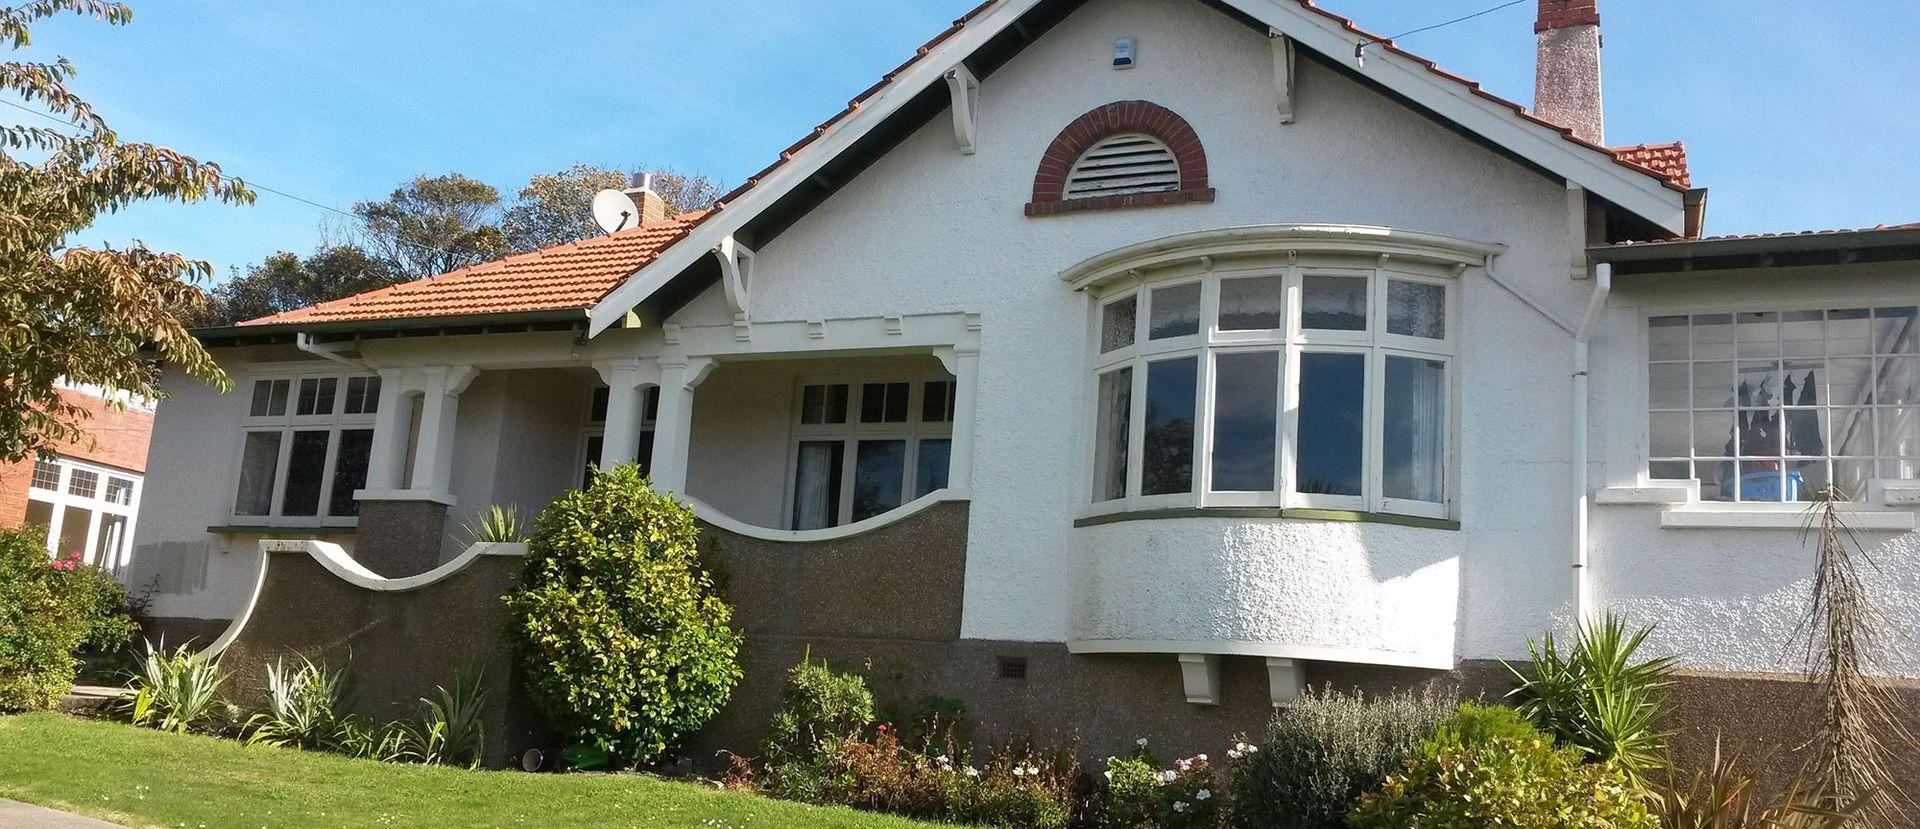 Painted house by Decorating services dunedin